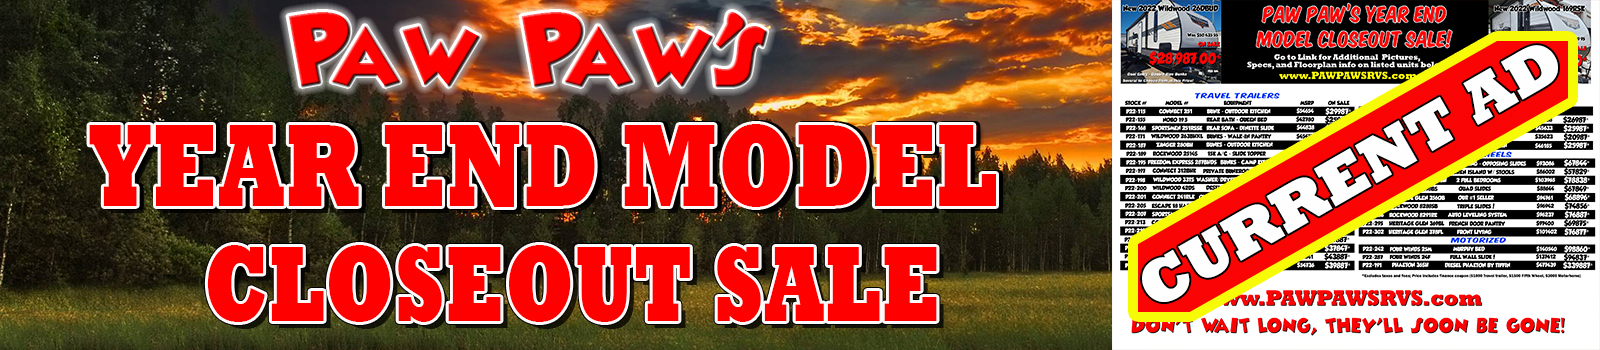 Year End Model Closeout Sale Current Ad